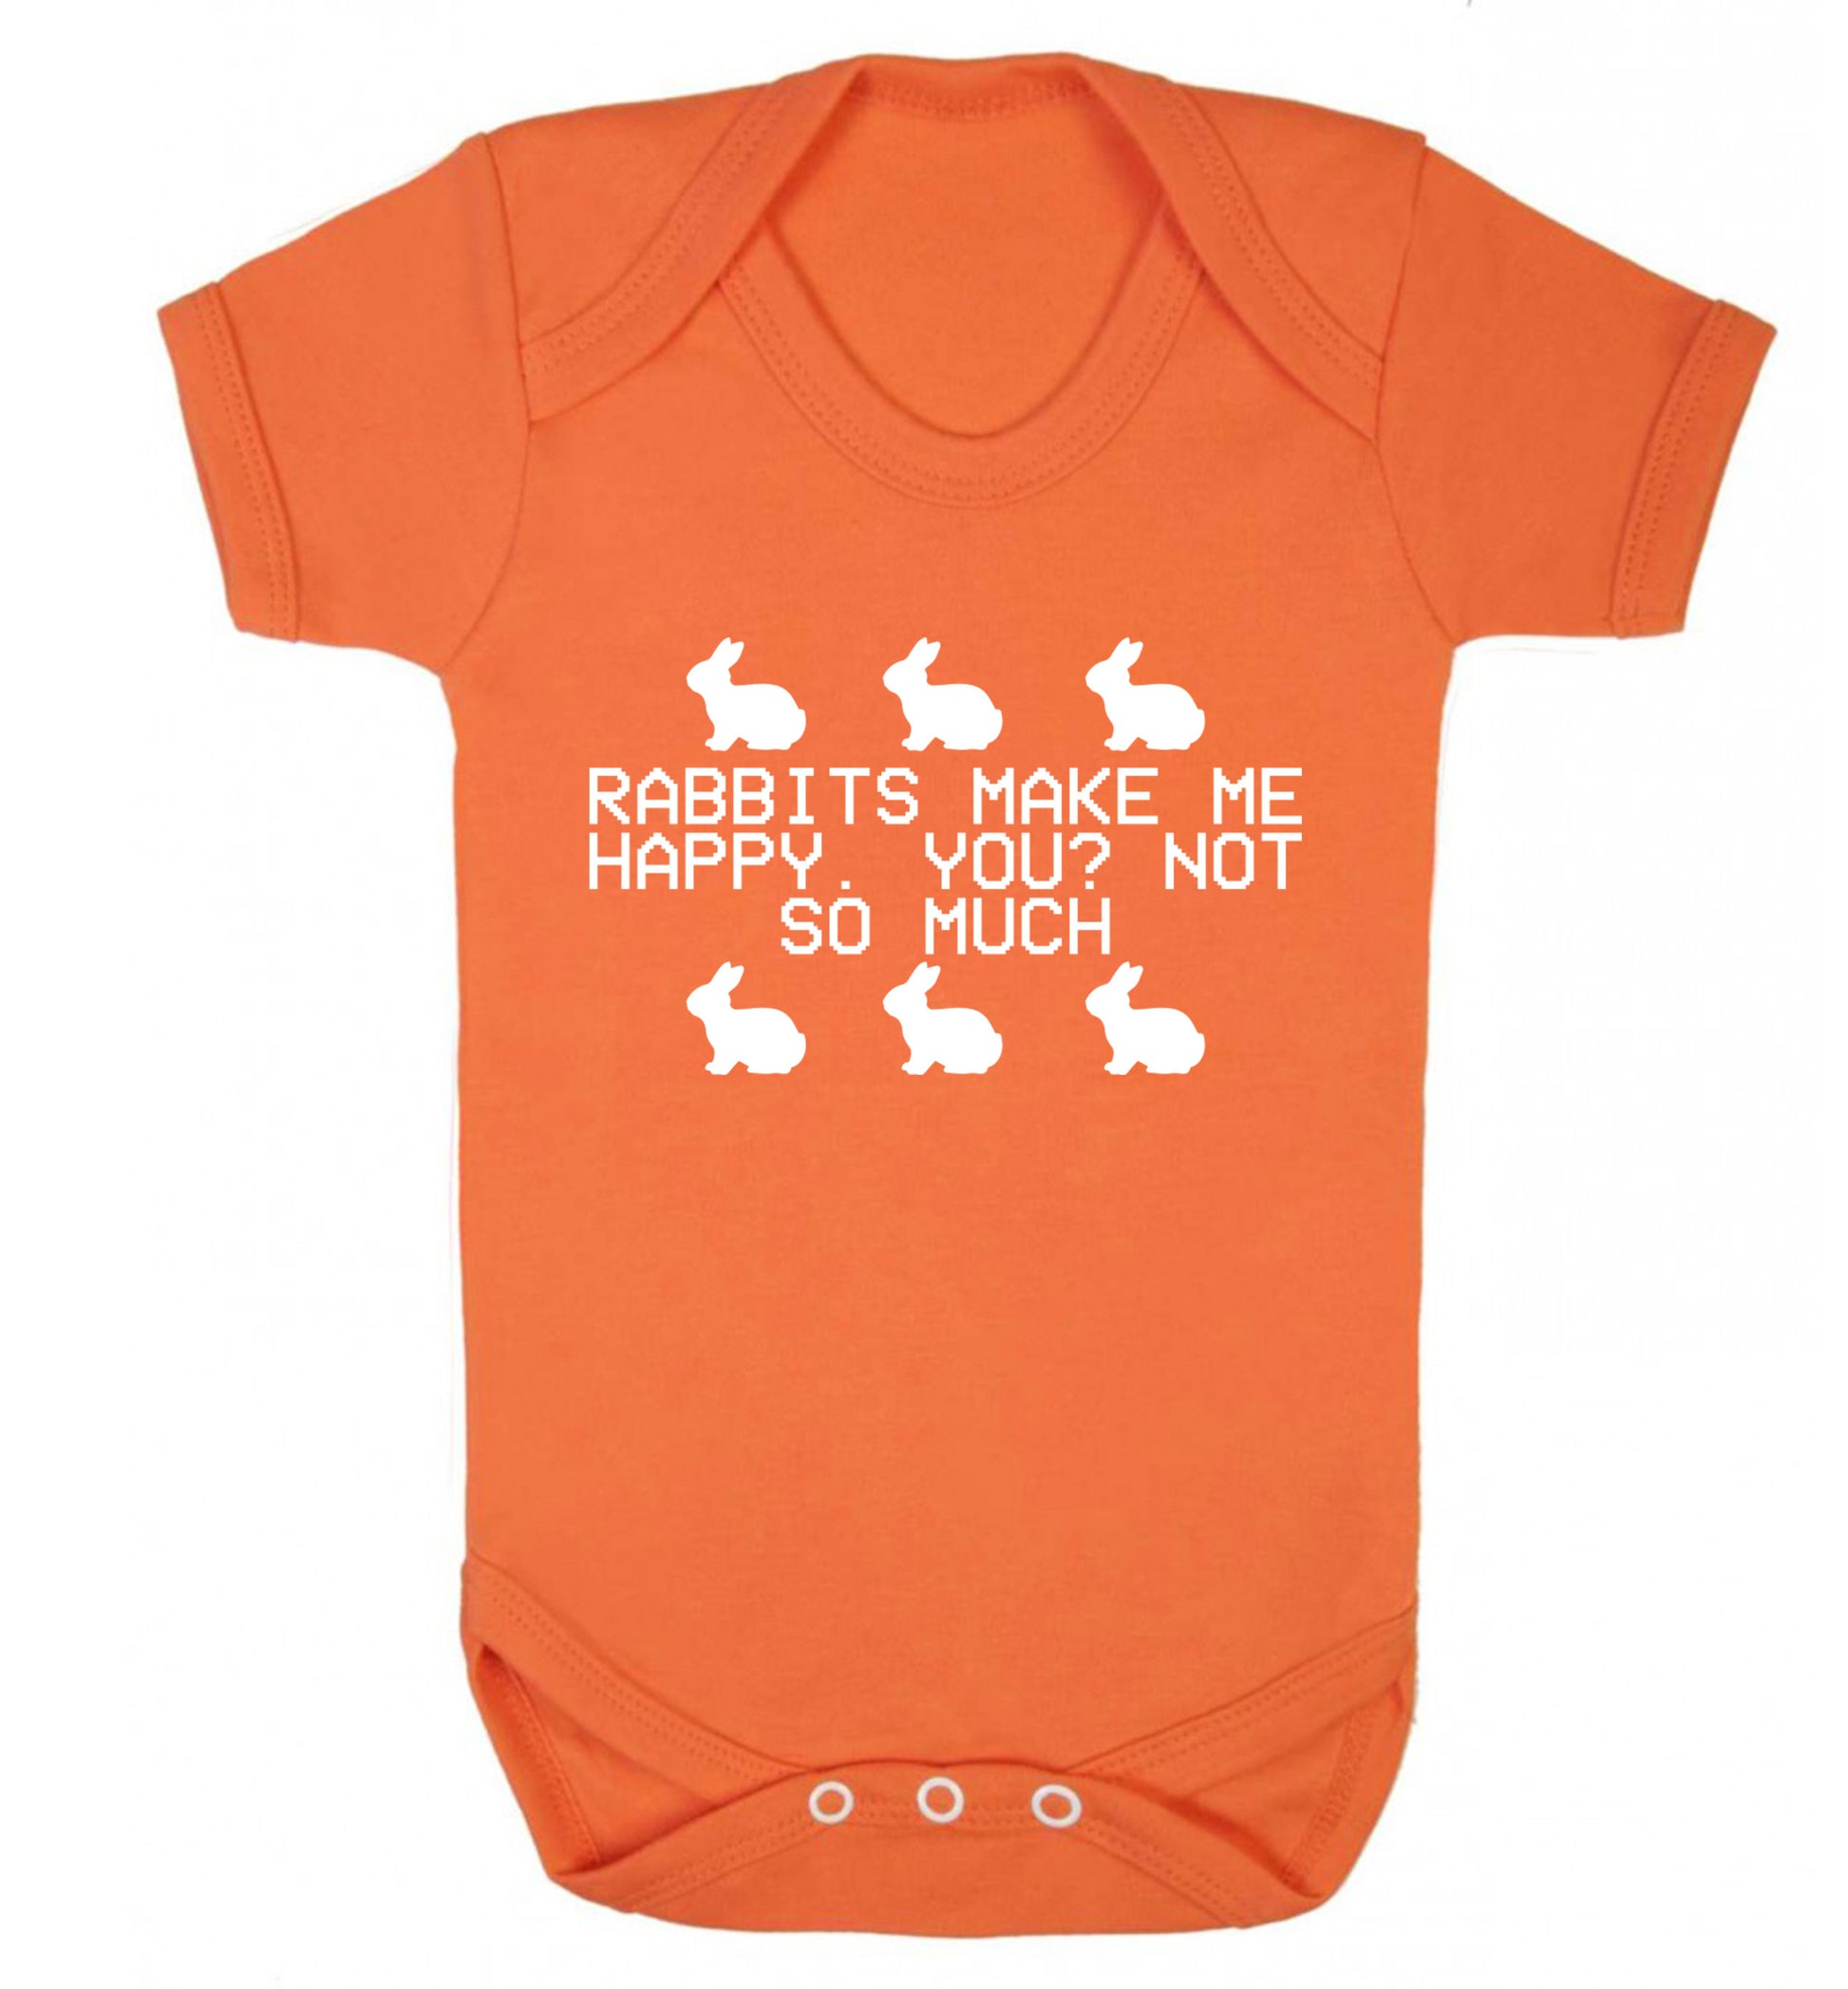 Rabbits make me happy, you not so much Baby Vest orange 18-24 months